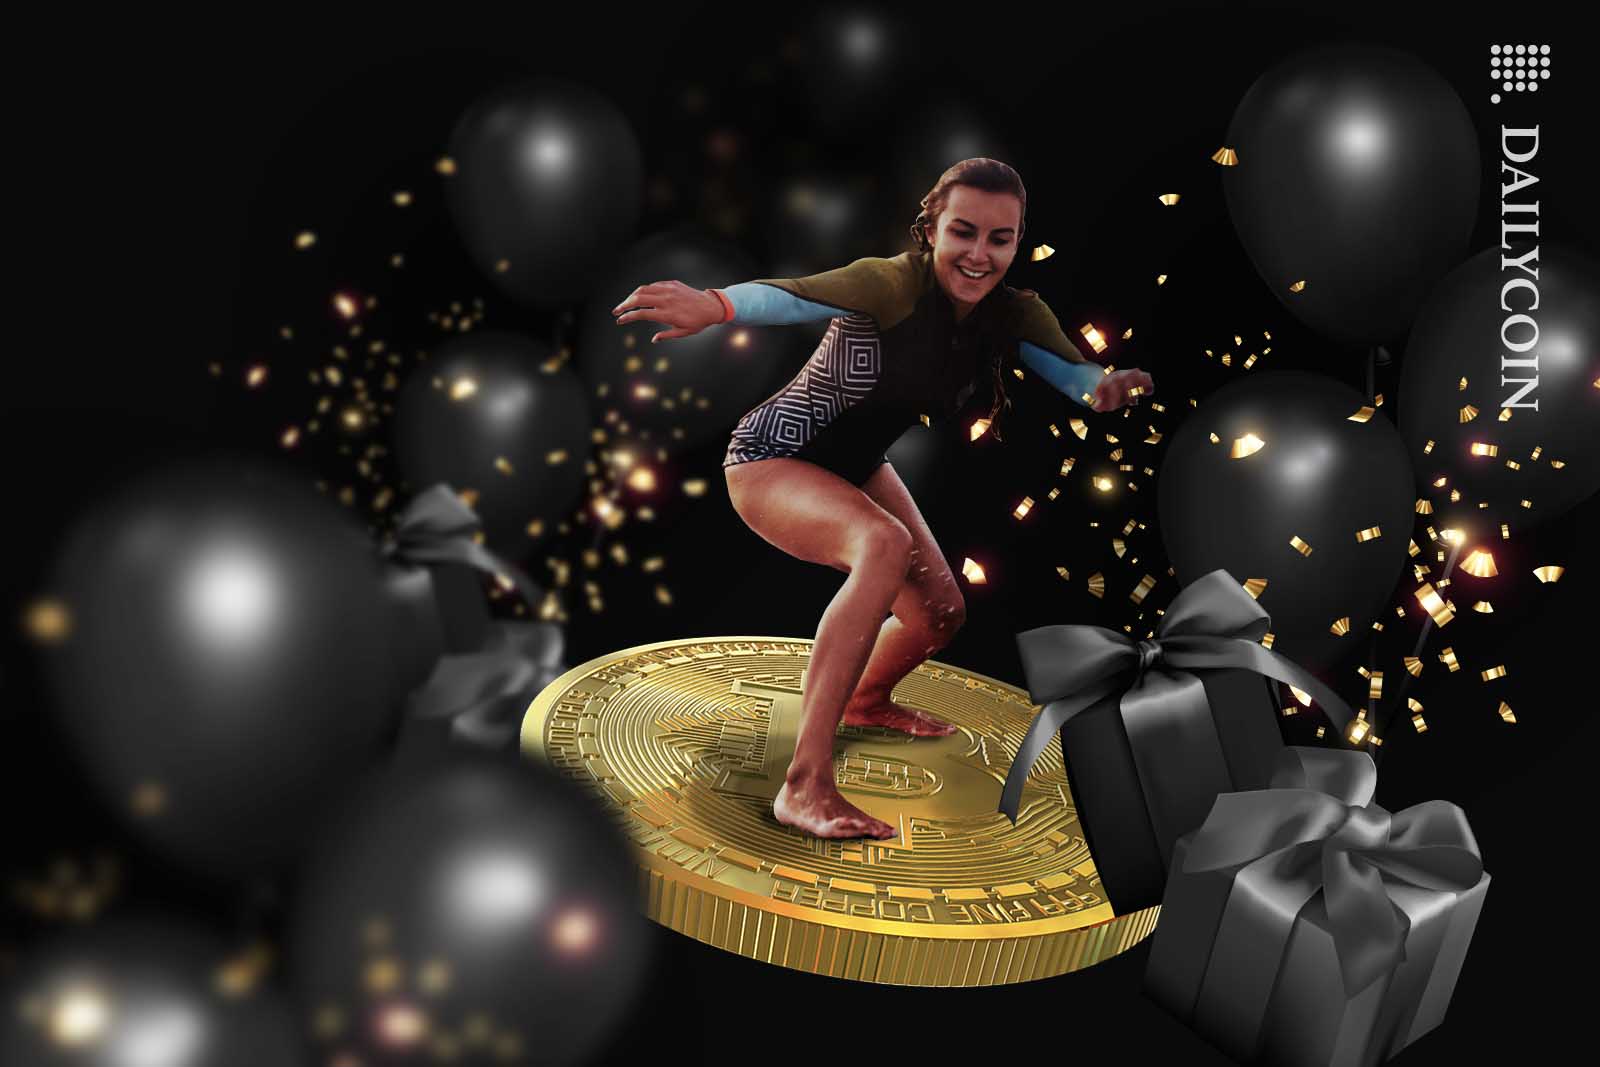 Woman enjoys surfing on a Bitcoin, saloming between presents and balloons.